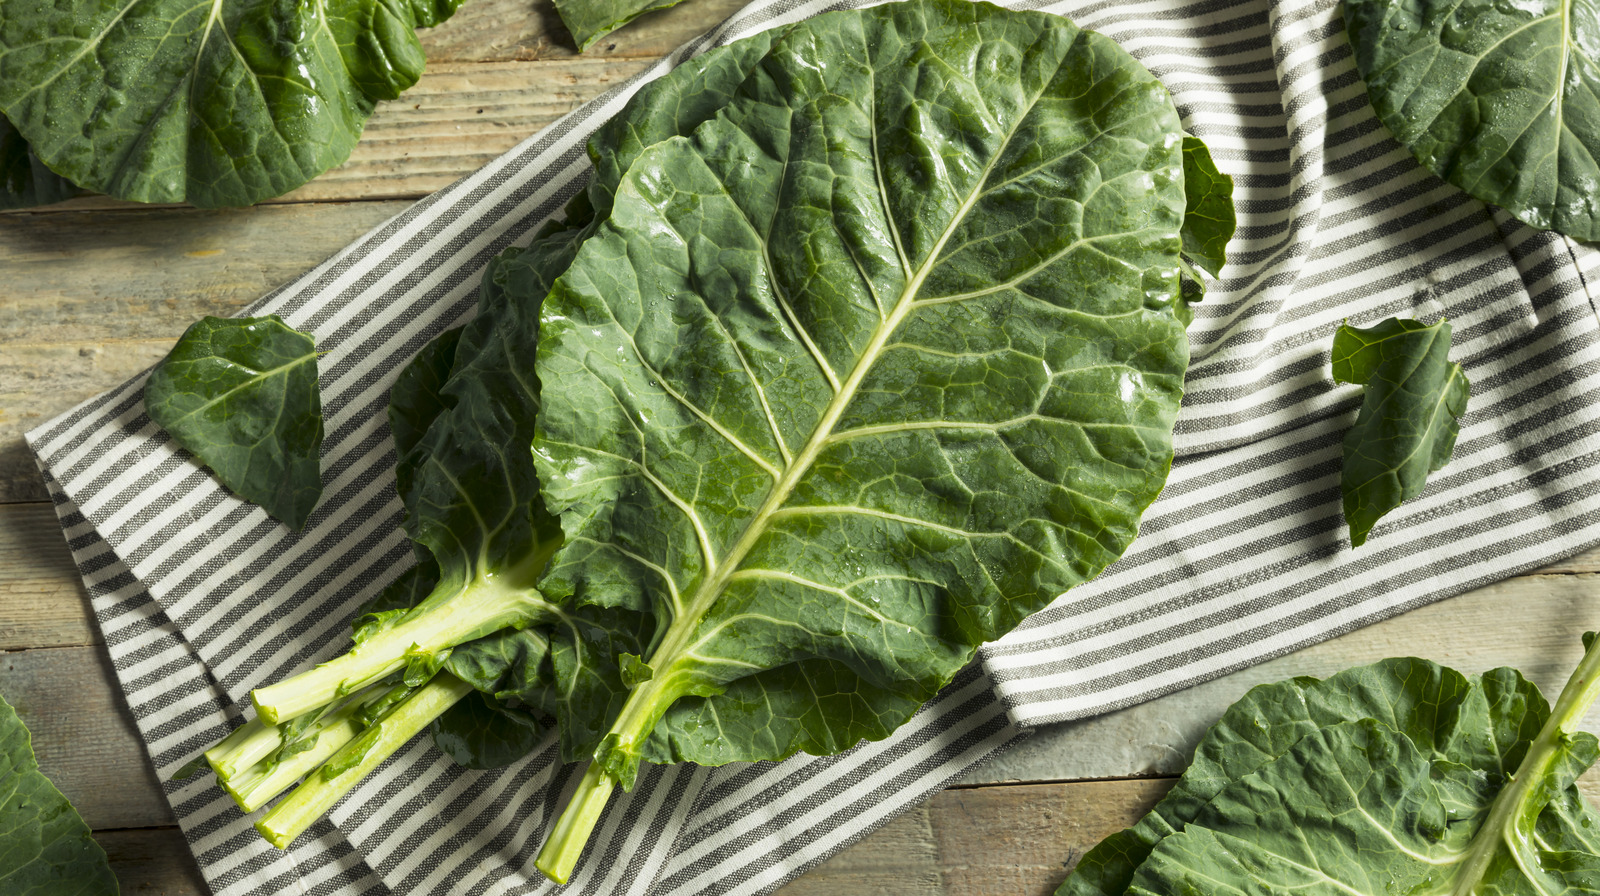 How To Blanch and Store Collard Greens, Preserve and Store Fresh Greens